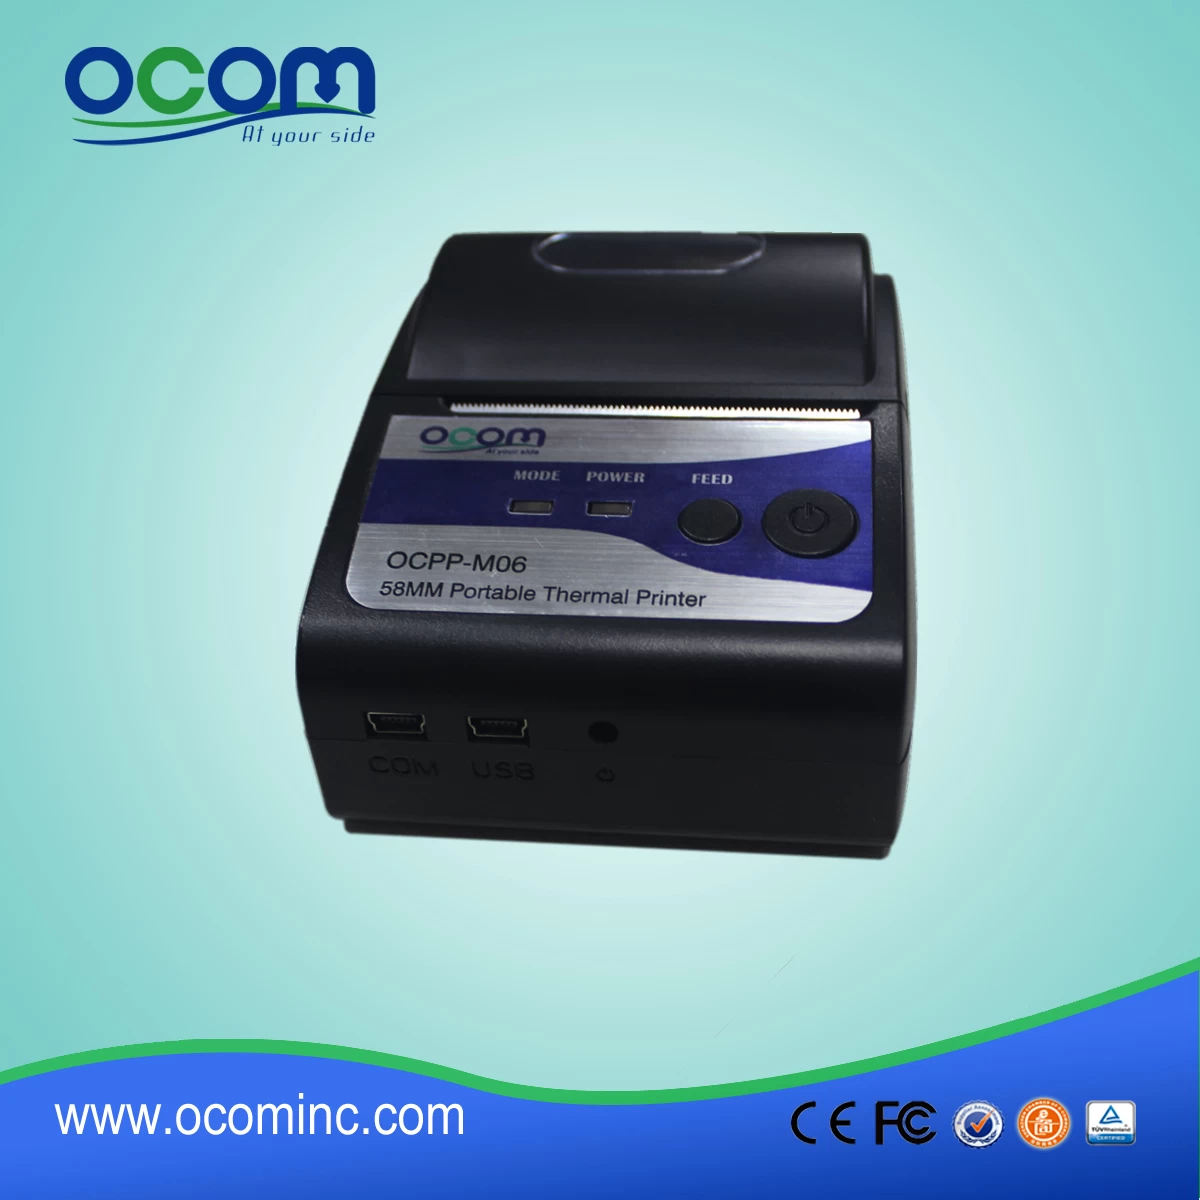 OCPP-M06 Best Seller Portable Thermal Receipt Printer With Bluetooth